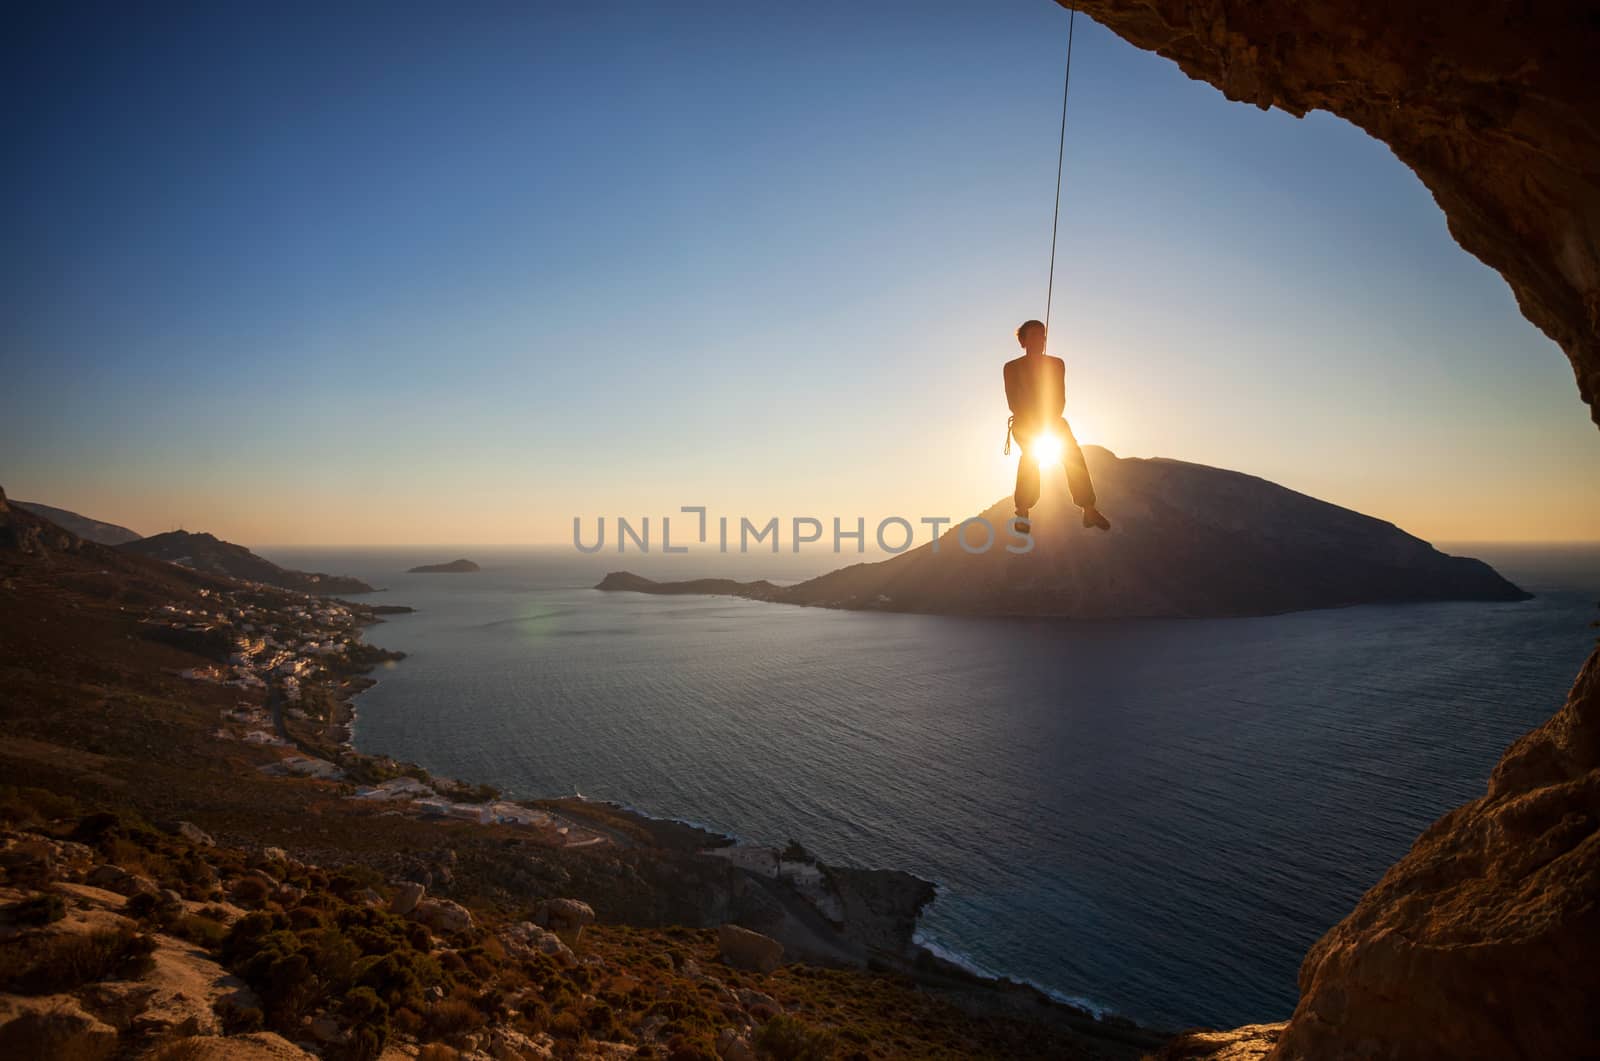 Rock climber hanging on rope while lead climbing at sunset, with Telendos island in background. Kalymnos island, Greece.